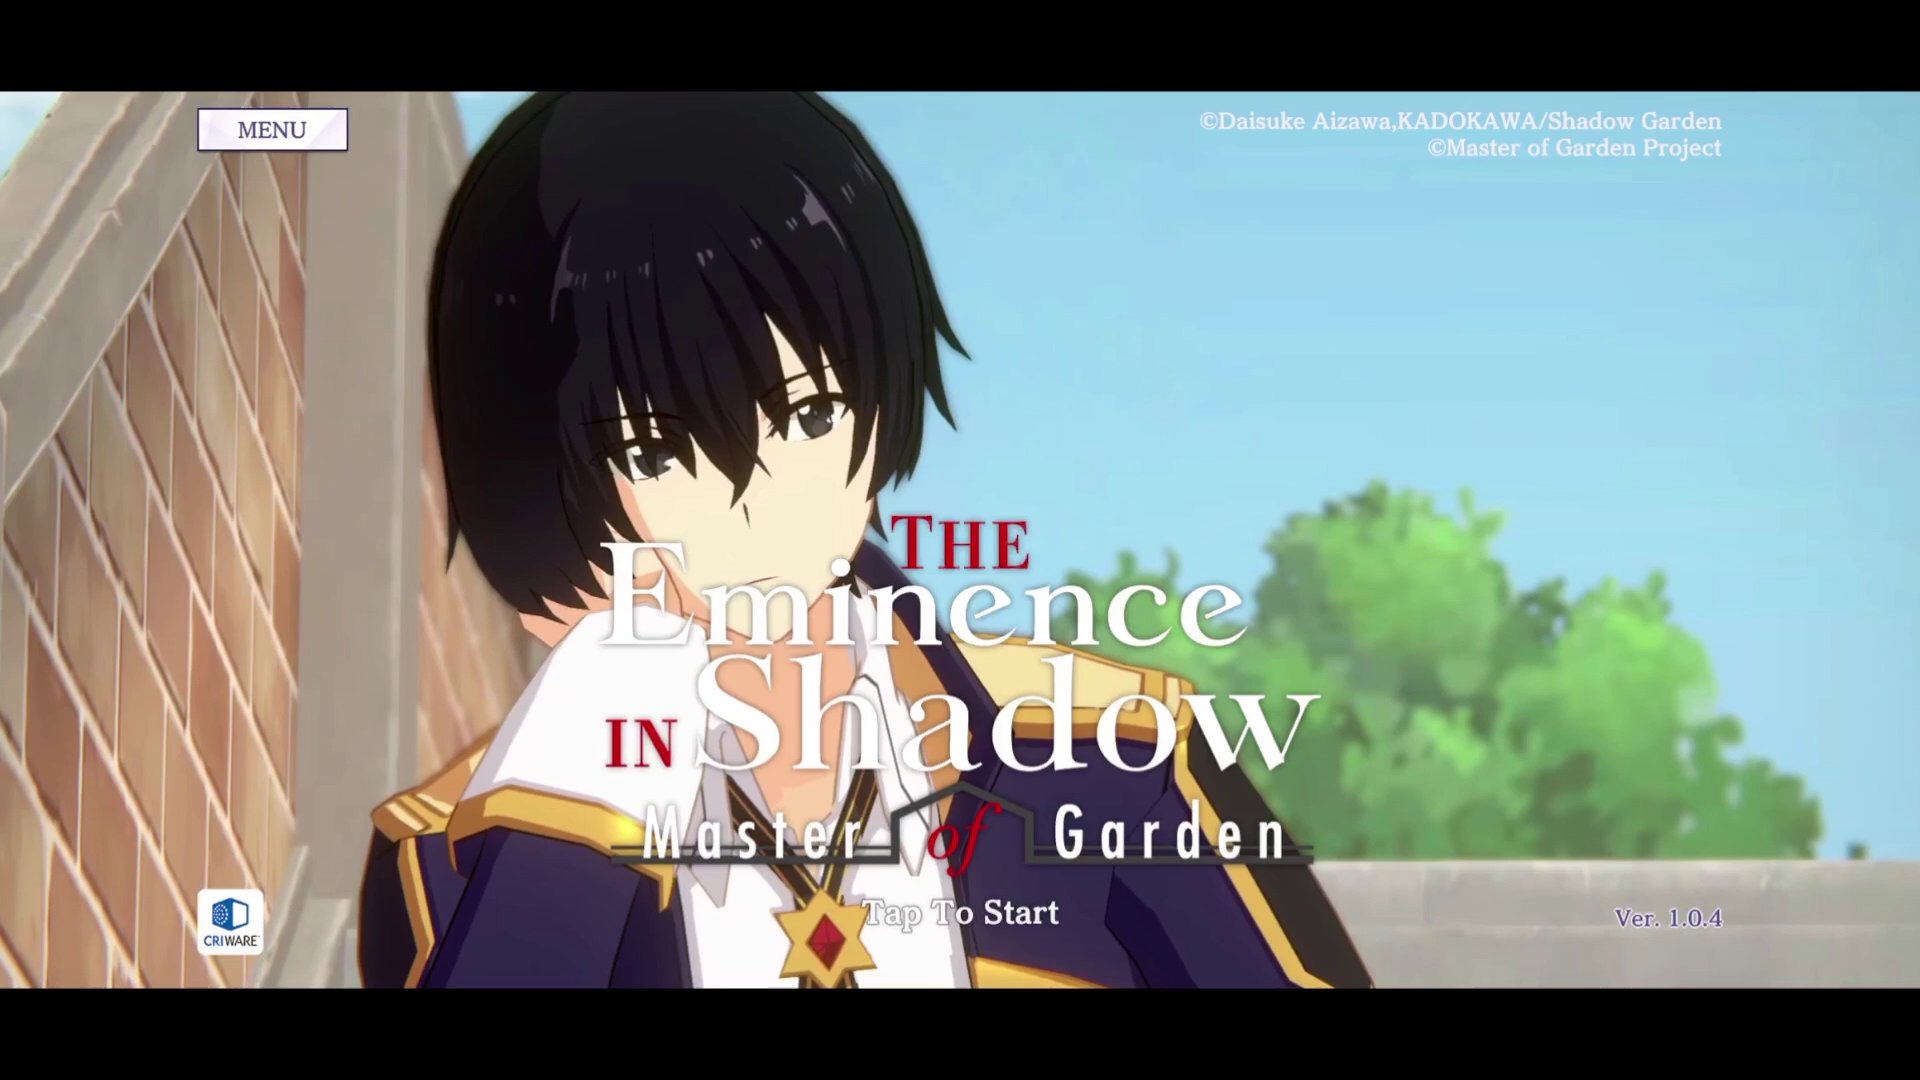 The Eminence in Shadow: Master of Garden is coming to mobile on